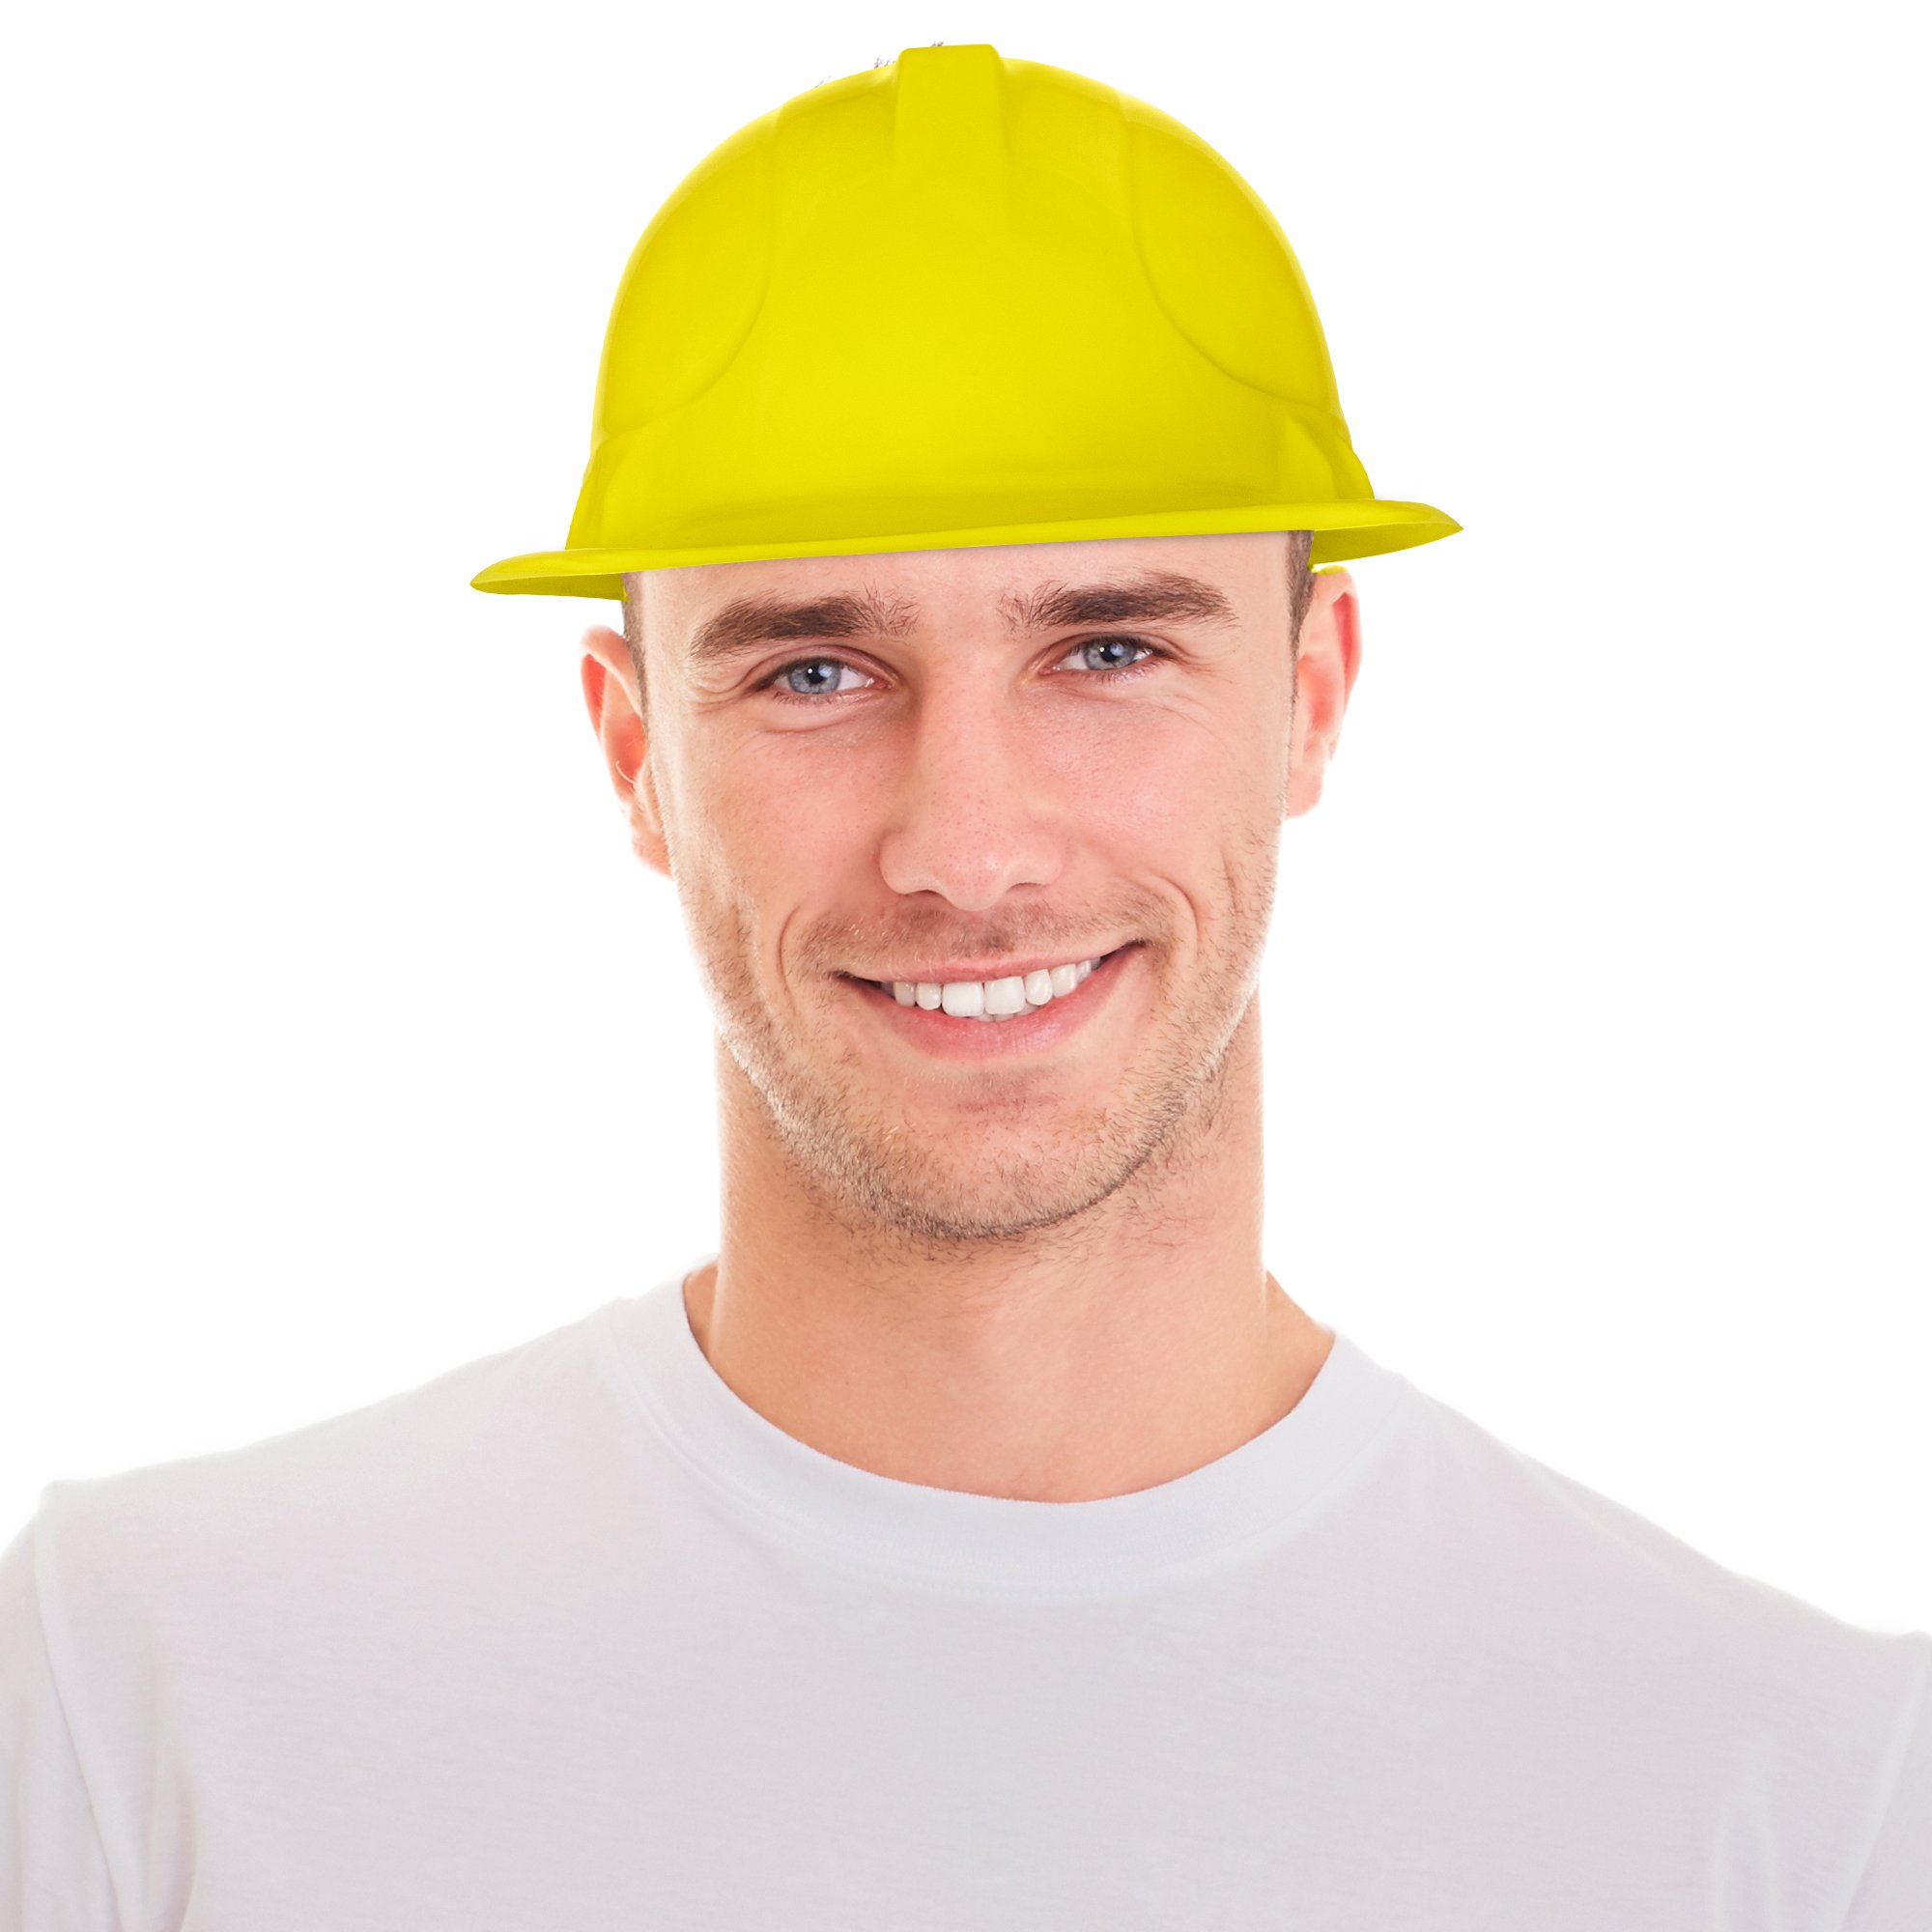 package of 12 US Toy Yellow Construction Hats